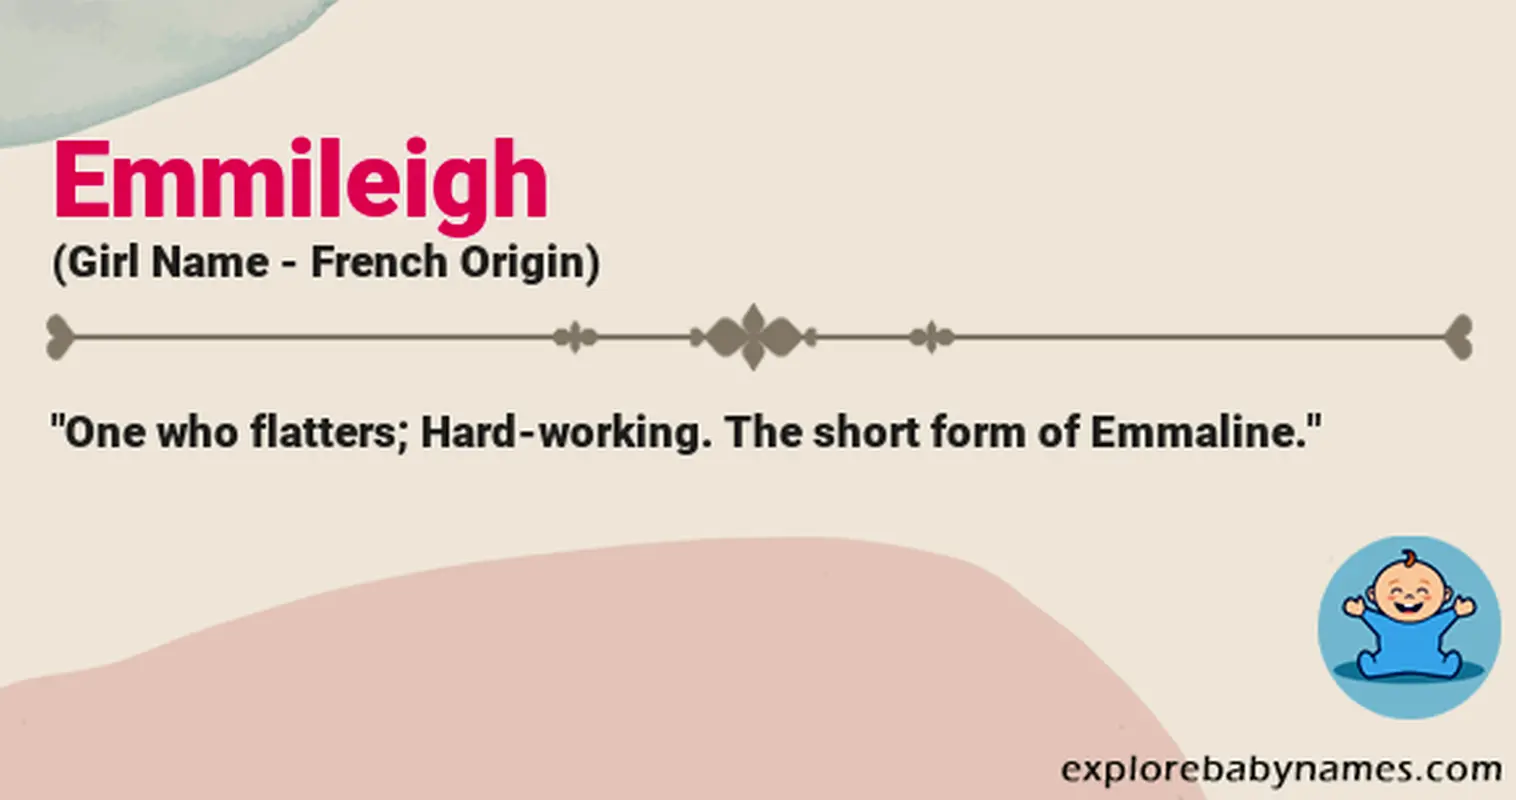 Meaning of Emmileigh